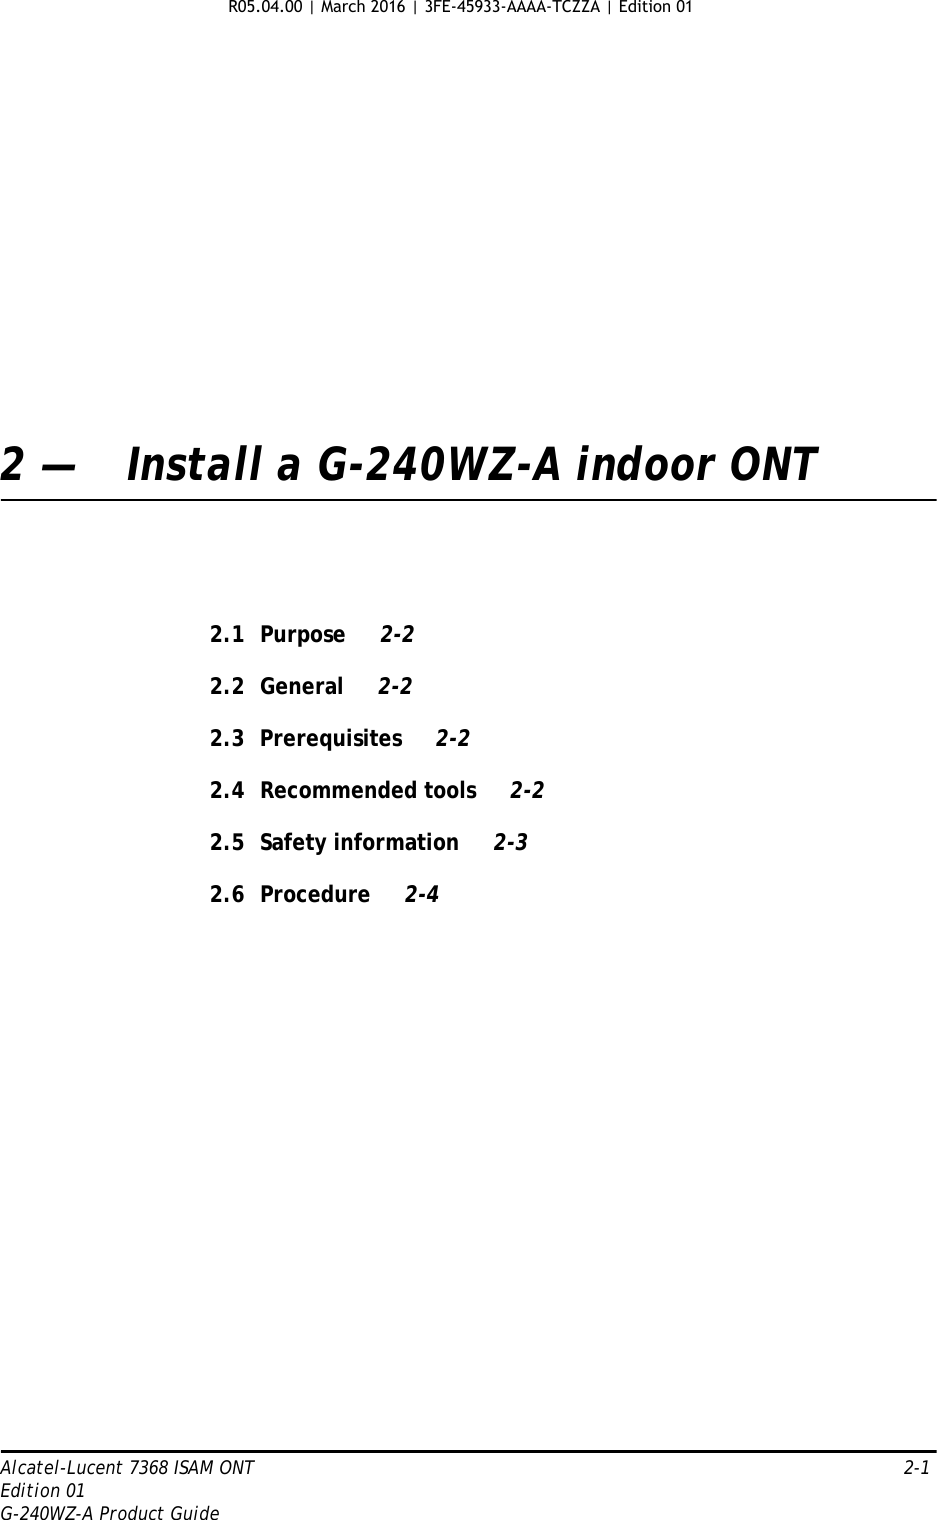 Alcatel-Lucent 7368 ISAM ONT   2-1Edition 01G-240WZ-A Product Guide2 — Install a G-240WZ-A indoor ONT2.1 Purpose 2-22.2 General 2-22.3 Prerequisites 2-22.4 Recommended tools 2-22.5 Safety information 2-32.6 Procedure 2-4R05.04.00 | March 2016 | 3FE-45933-AAAA-TCZZA | Edition 01 